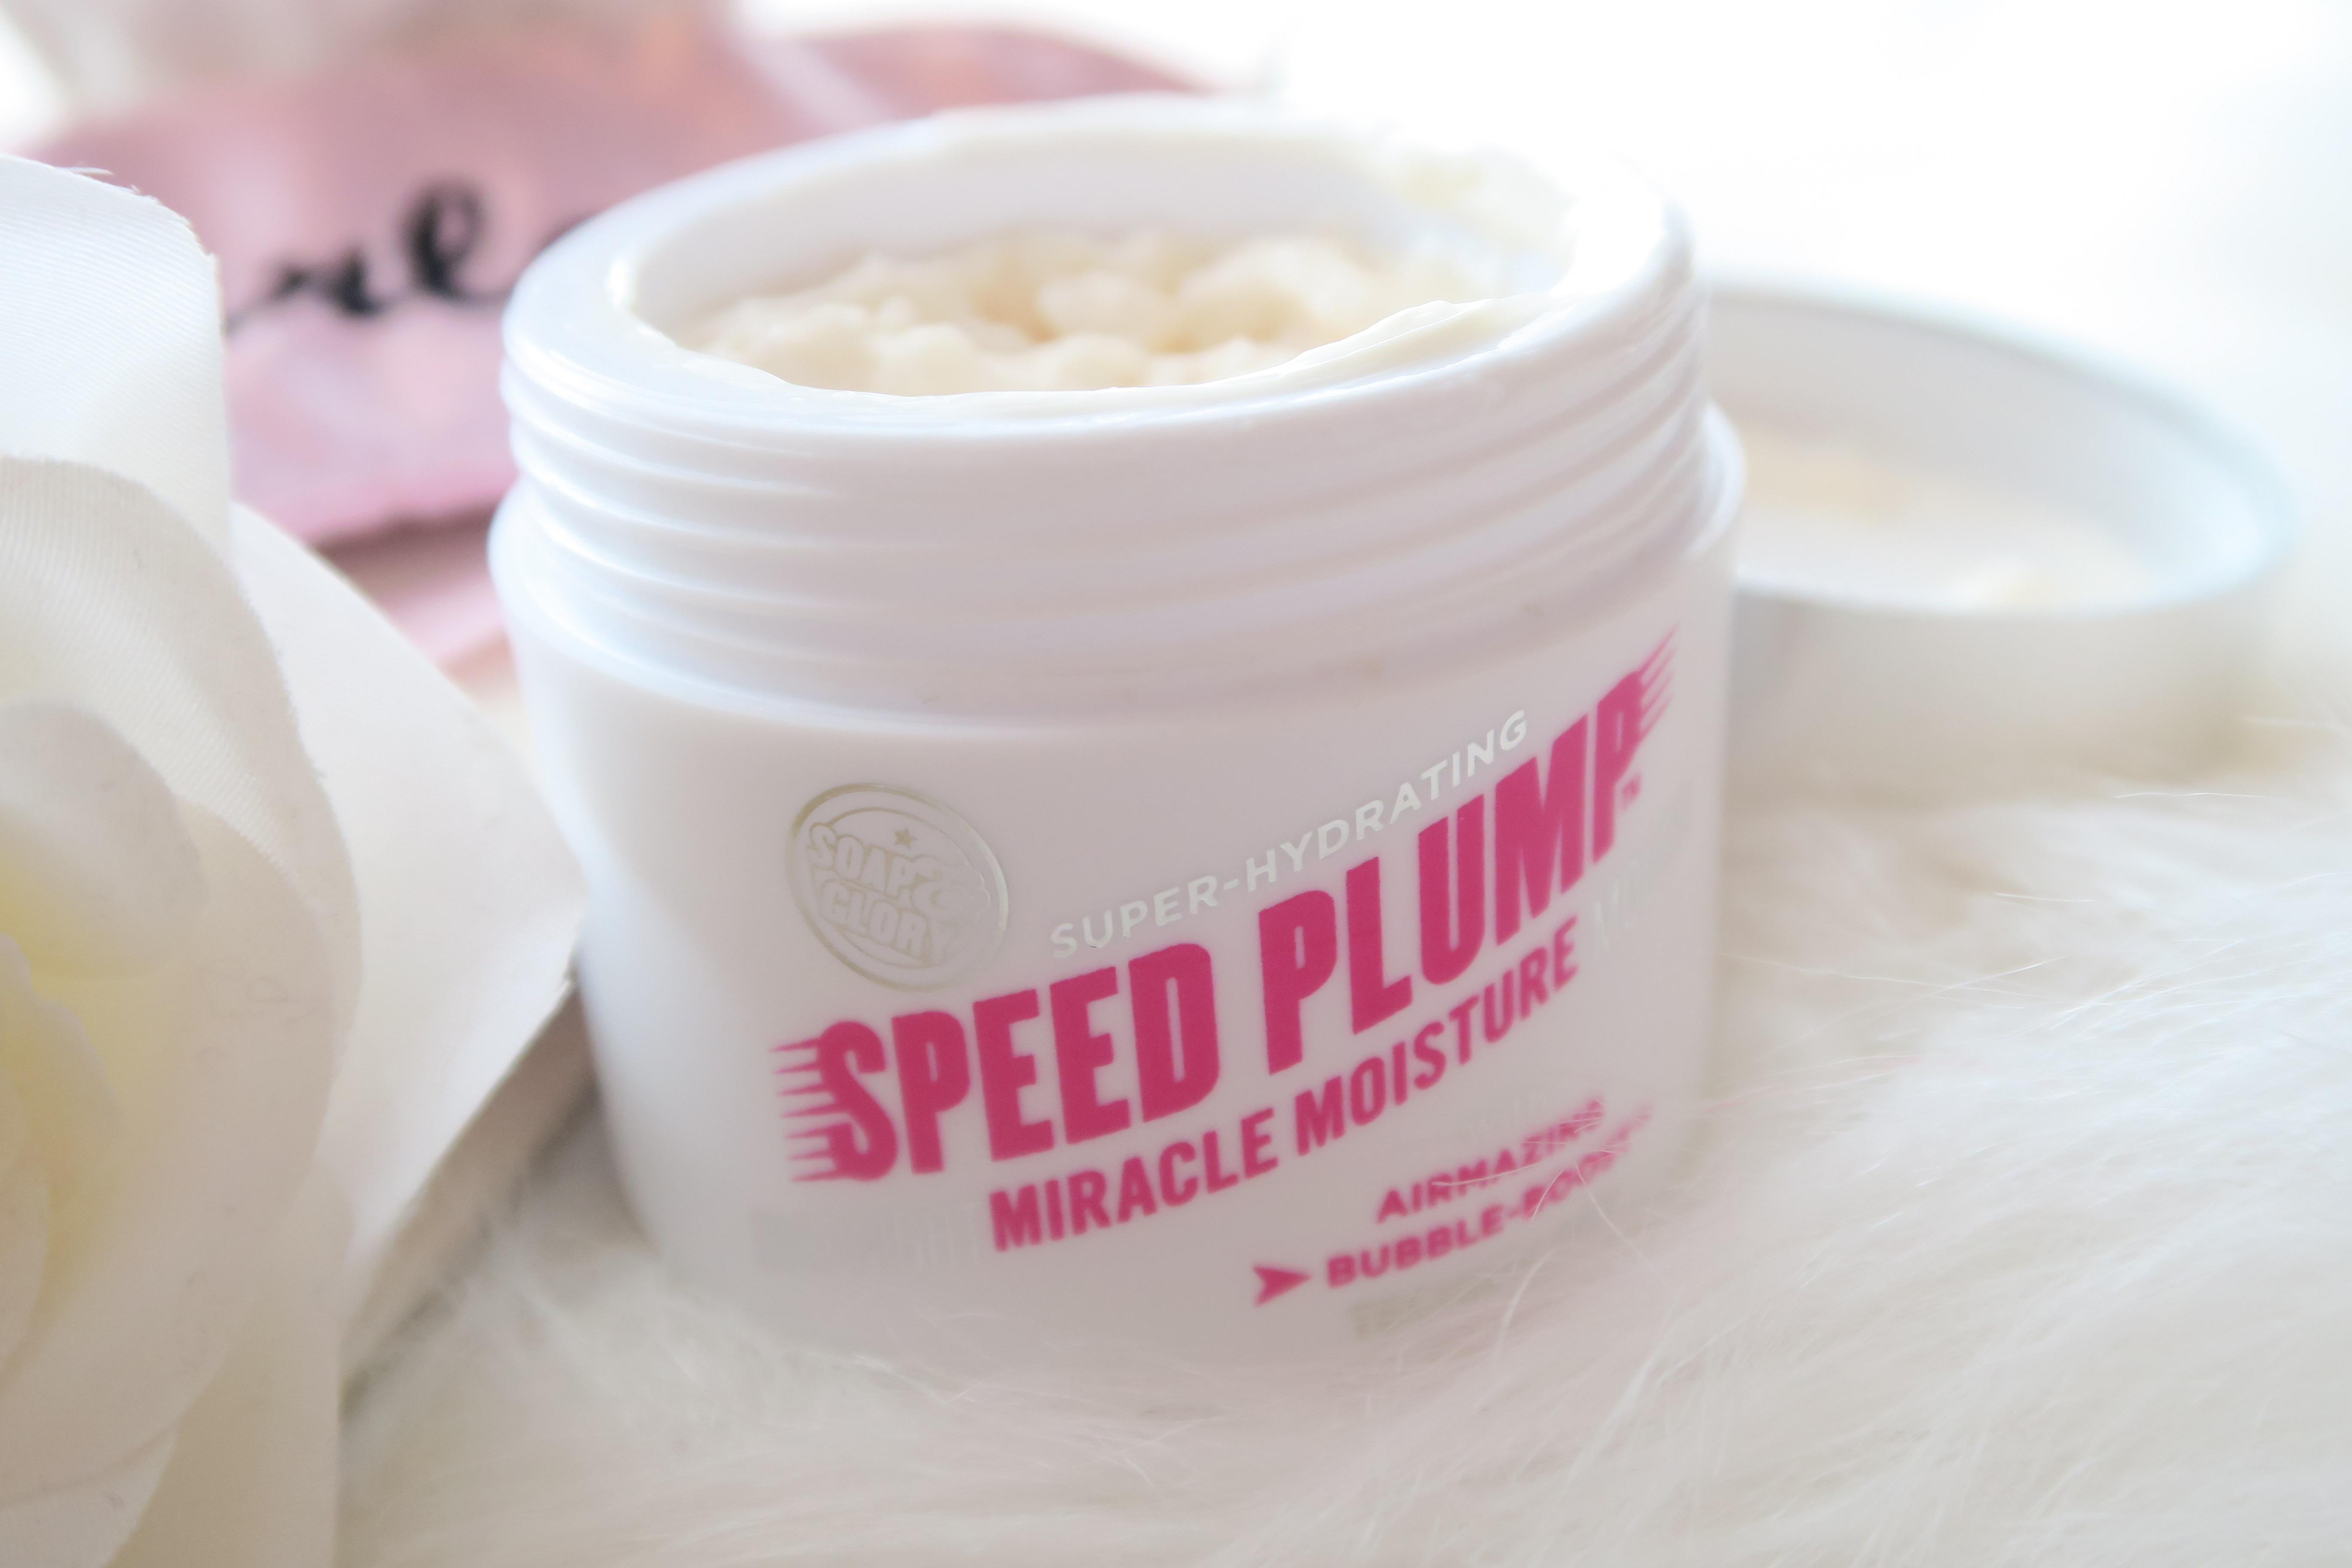 soap-and-glory-speed-plump-miracle-moisture-overnight-1